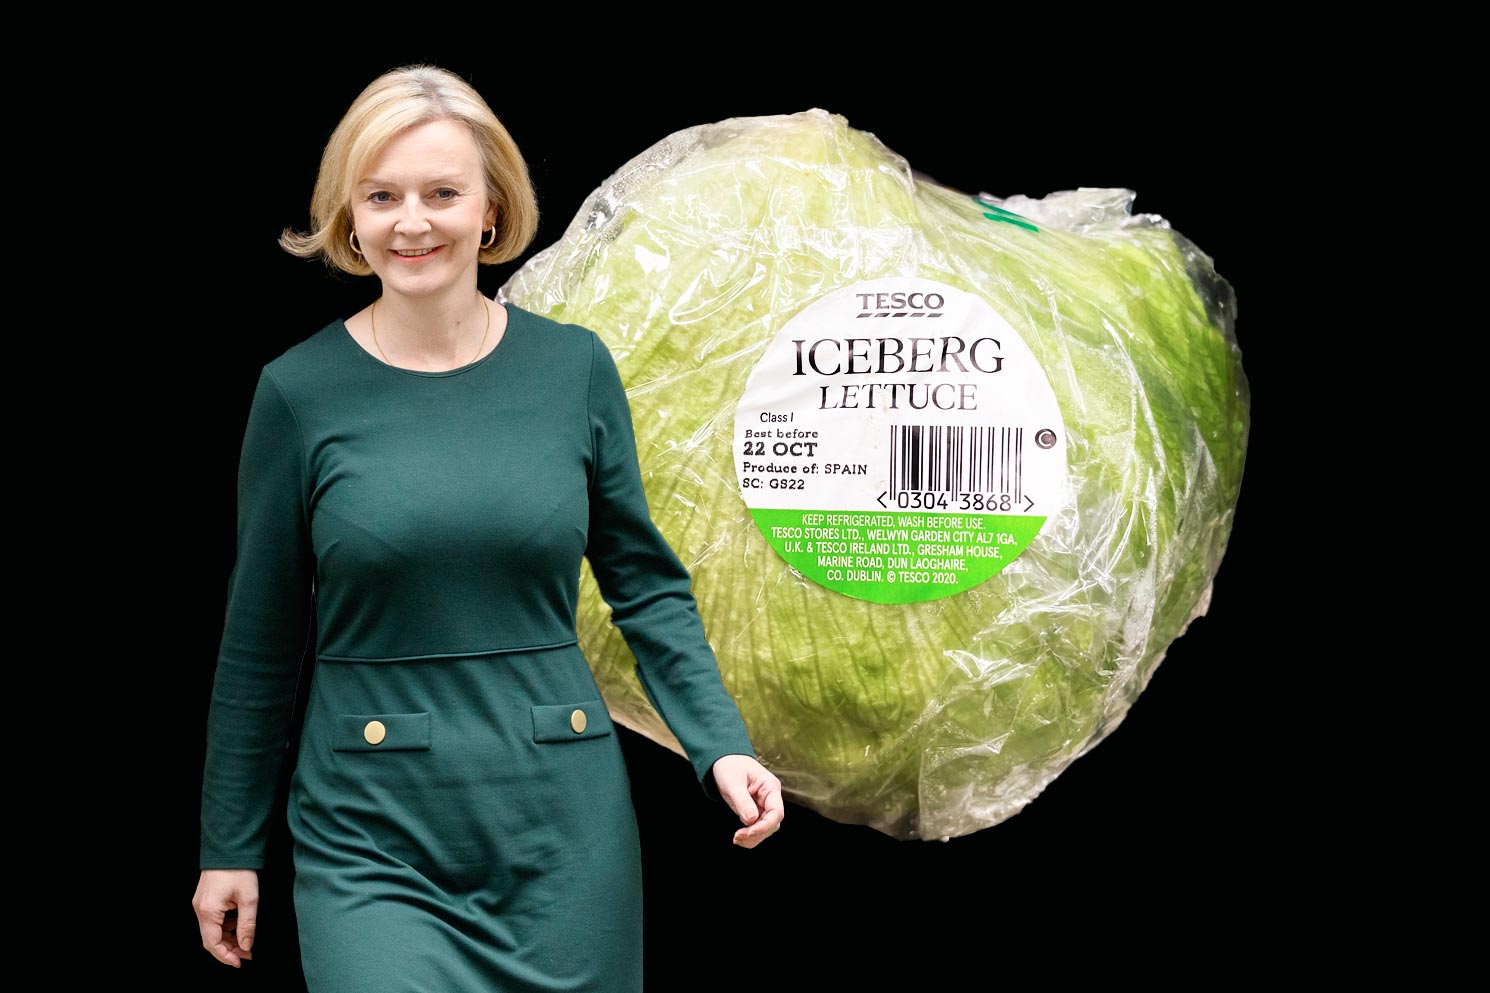 A collage of Liz Truss and a head of lettuce, identical to the one that outlasted her